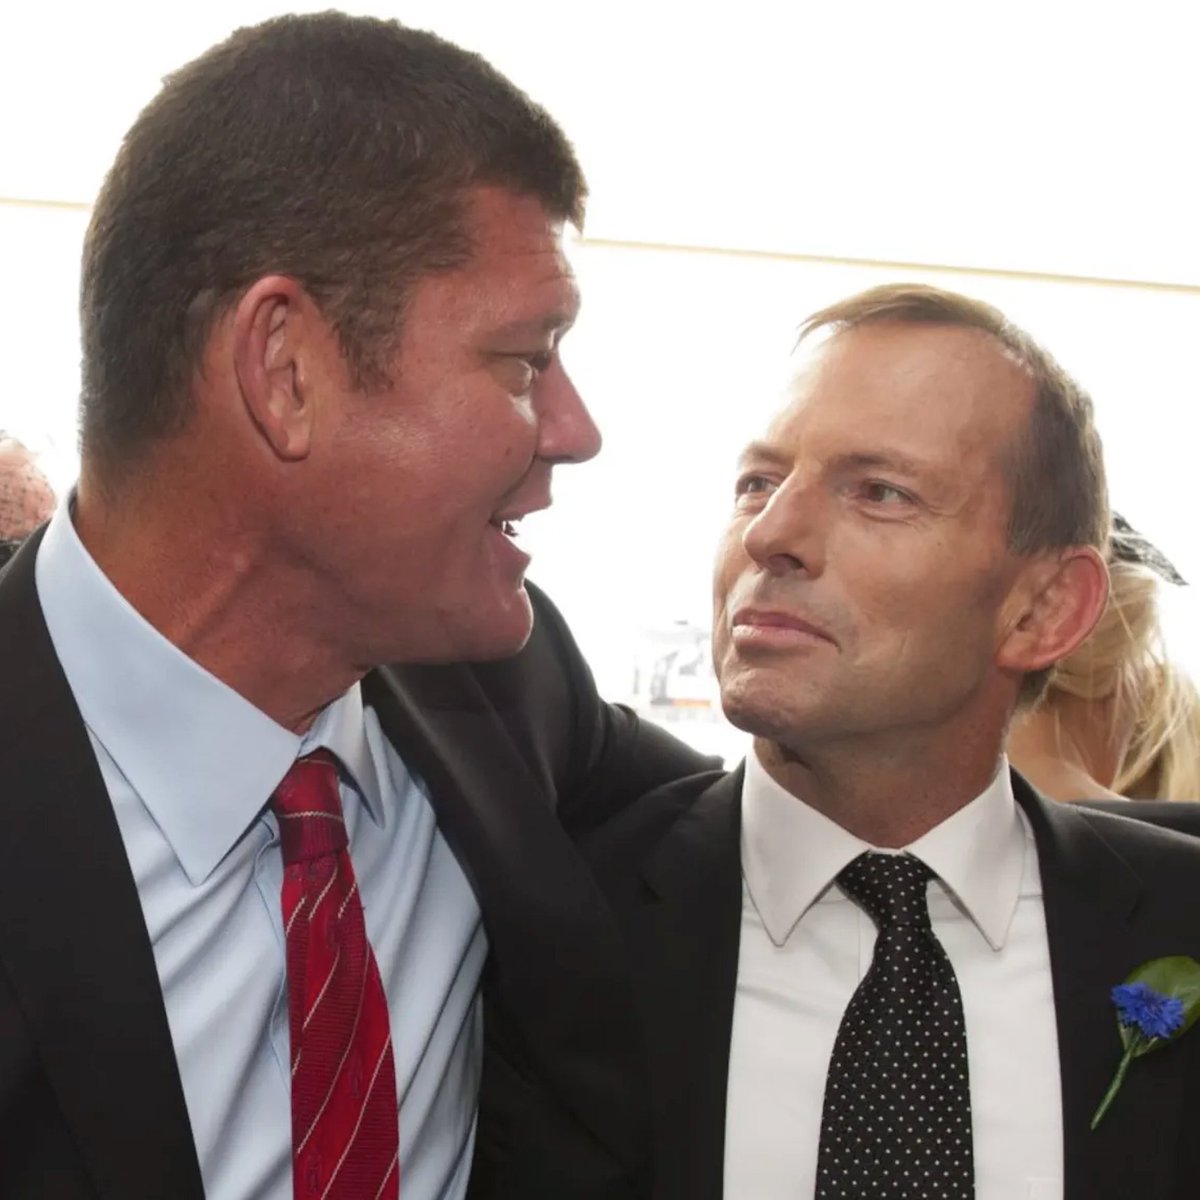 The thing is, when you cut the rich's taxes, they pocket the money. When you raise income support, people spend it. Experts reckon cutting the supplement tomorrow will gut the Australian economy of $31 billion.(Two PM pics for James Packer and his $3.6b)